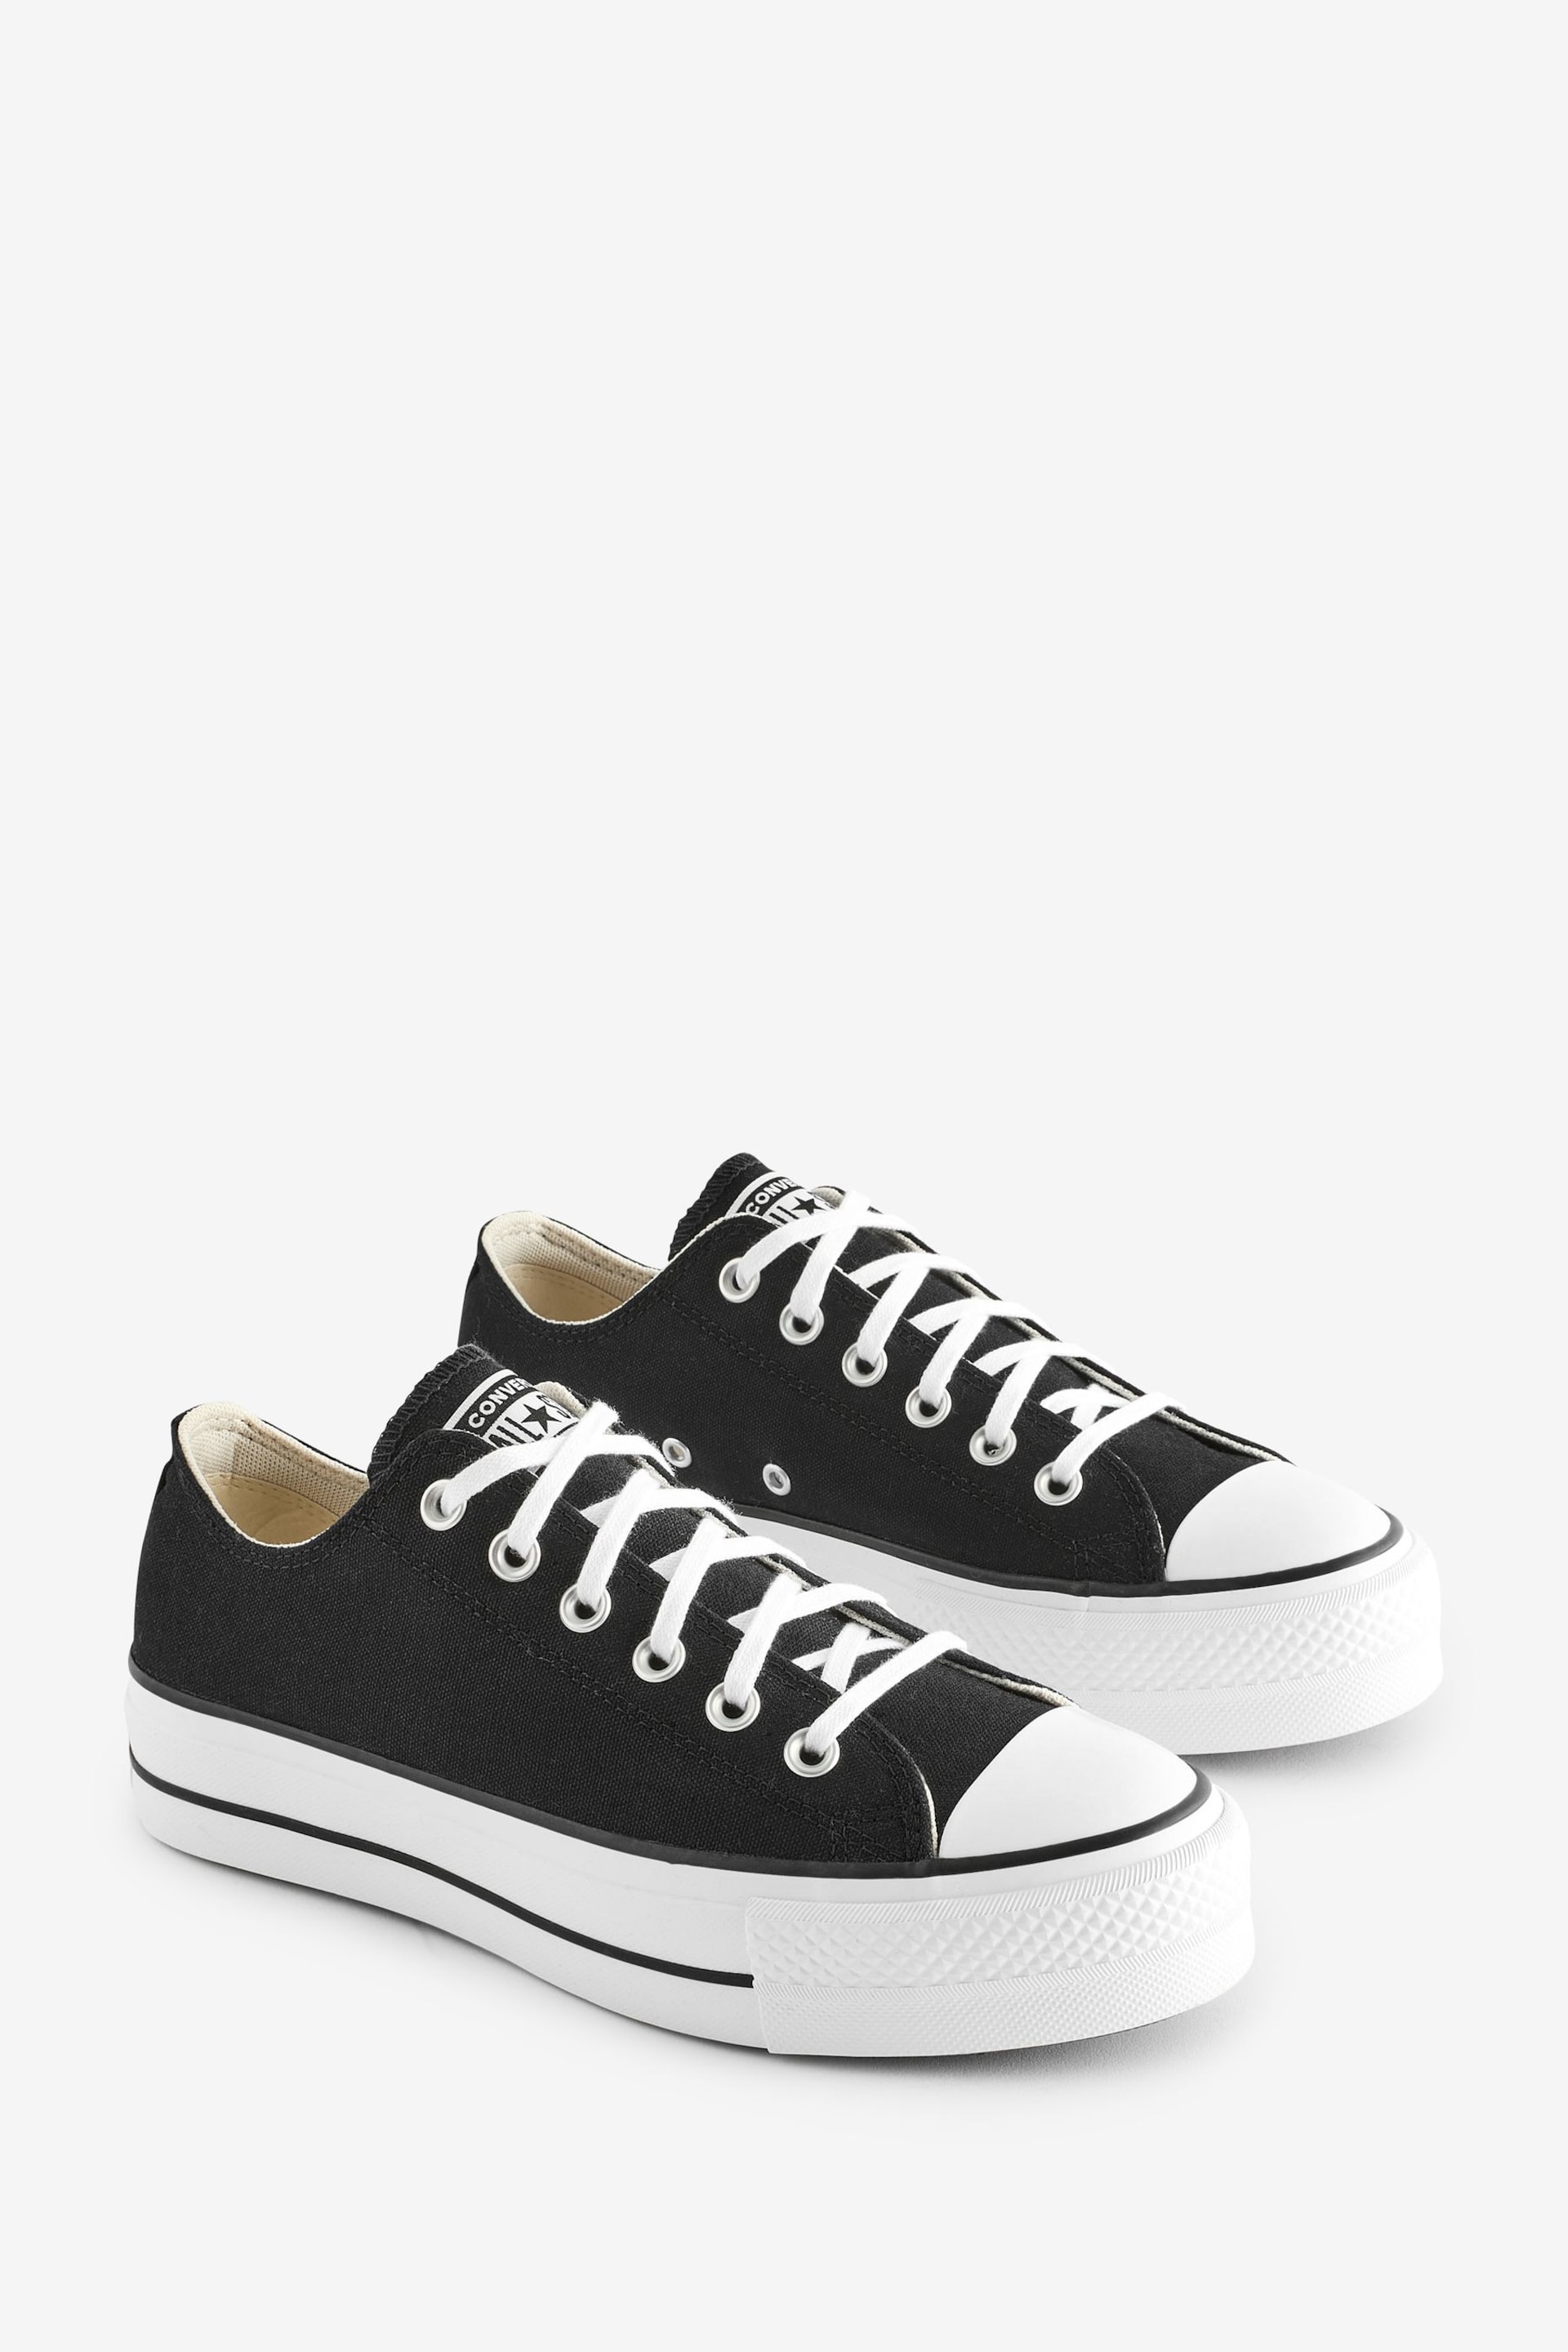 Converse Black Chuck Taylor All Star Lift Ox Trainers - Image 3 of 9